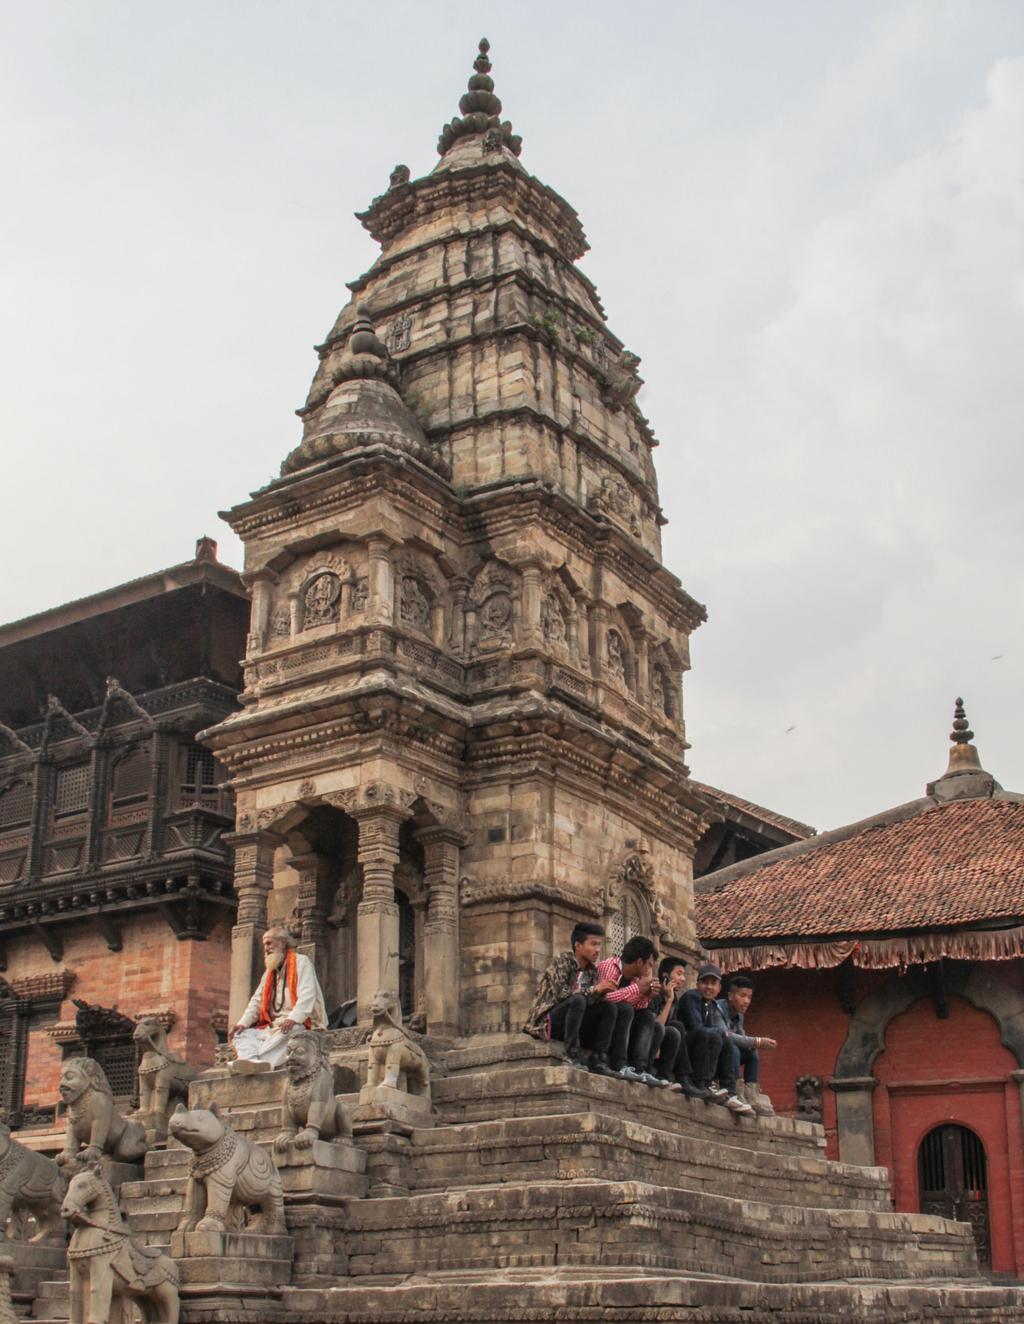 Nepal Tentative Dates: March 1-11 Cost: Approximately $3,000 (This will be all inclusive) Group max: 20 Group Leader: Mr. Brian Johnson brian.johnson@southwestchristian.org Goin to K-K-K-Kathmandu!